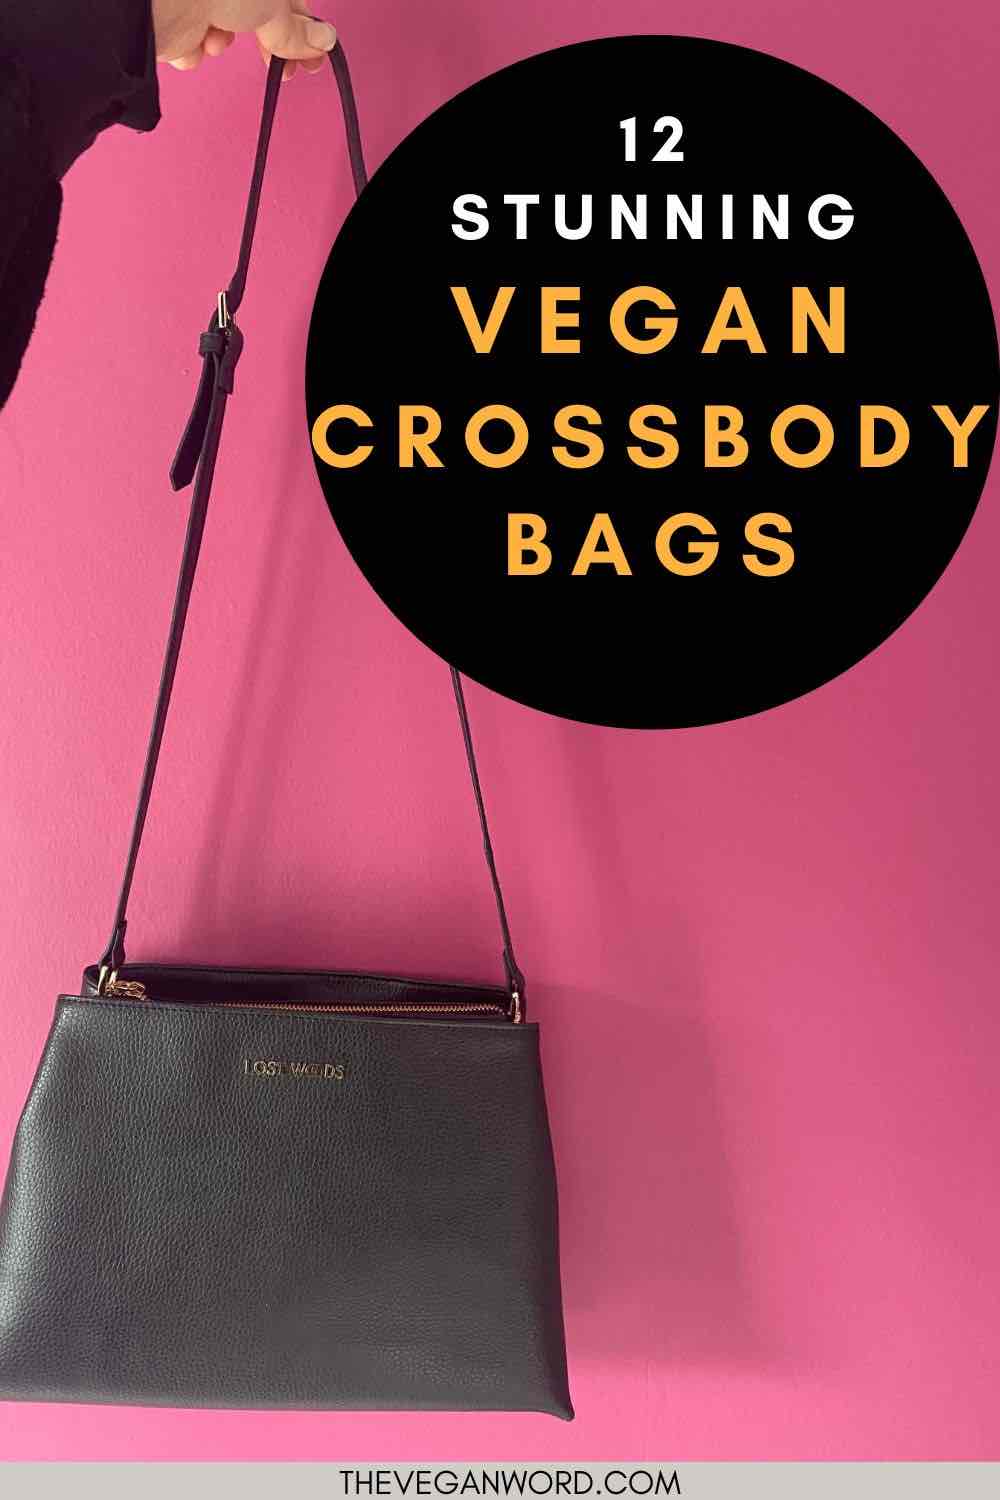 10 Eco-Friendly, Vegan, and Ethical Bag Brands